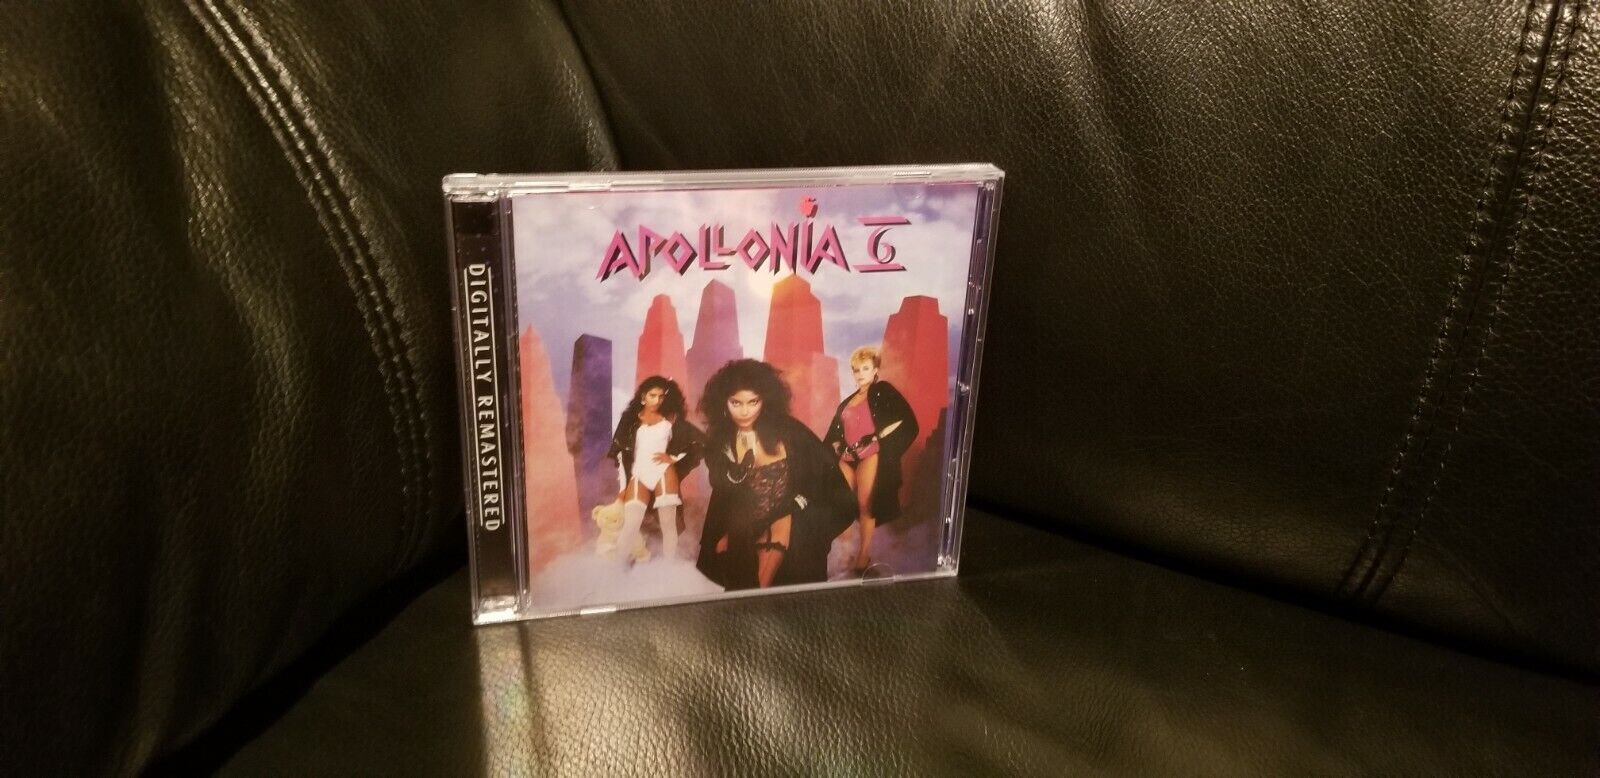 APOLLONIA 6 CD Vanity, PRINCE , MOTOWN Rare CD Extended Version, Limited Edition